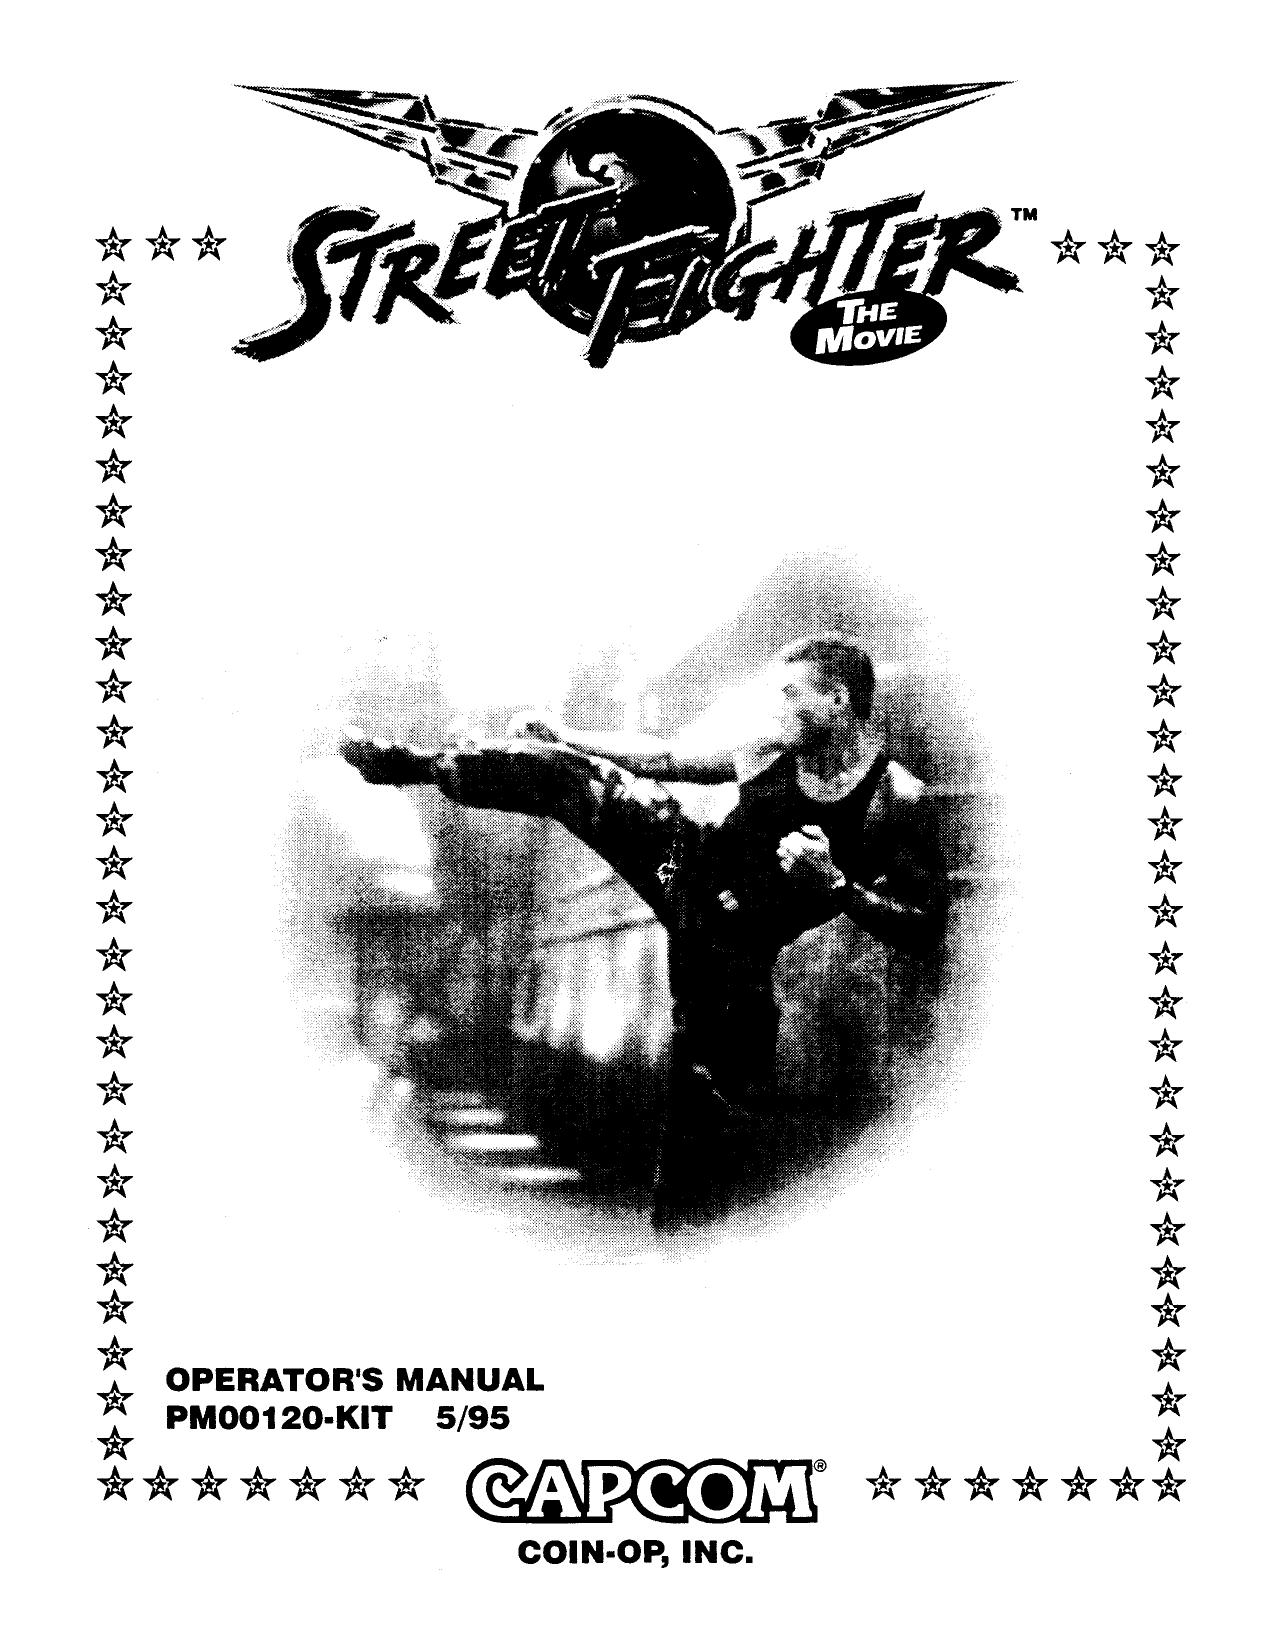 Street Fighter The Movie